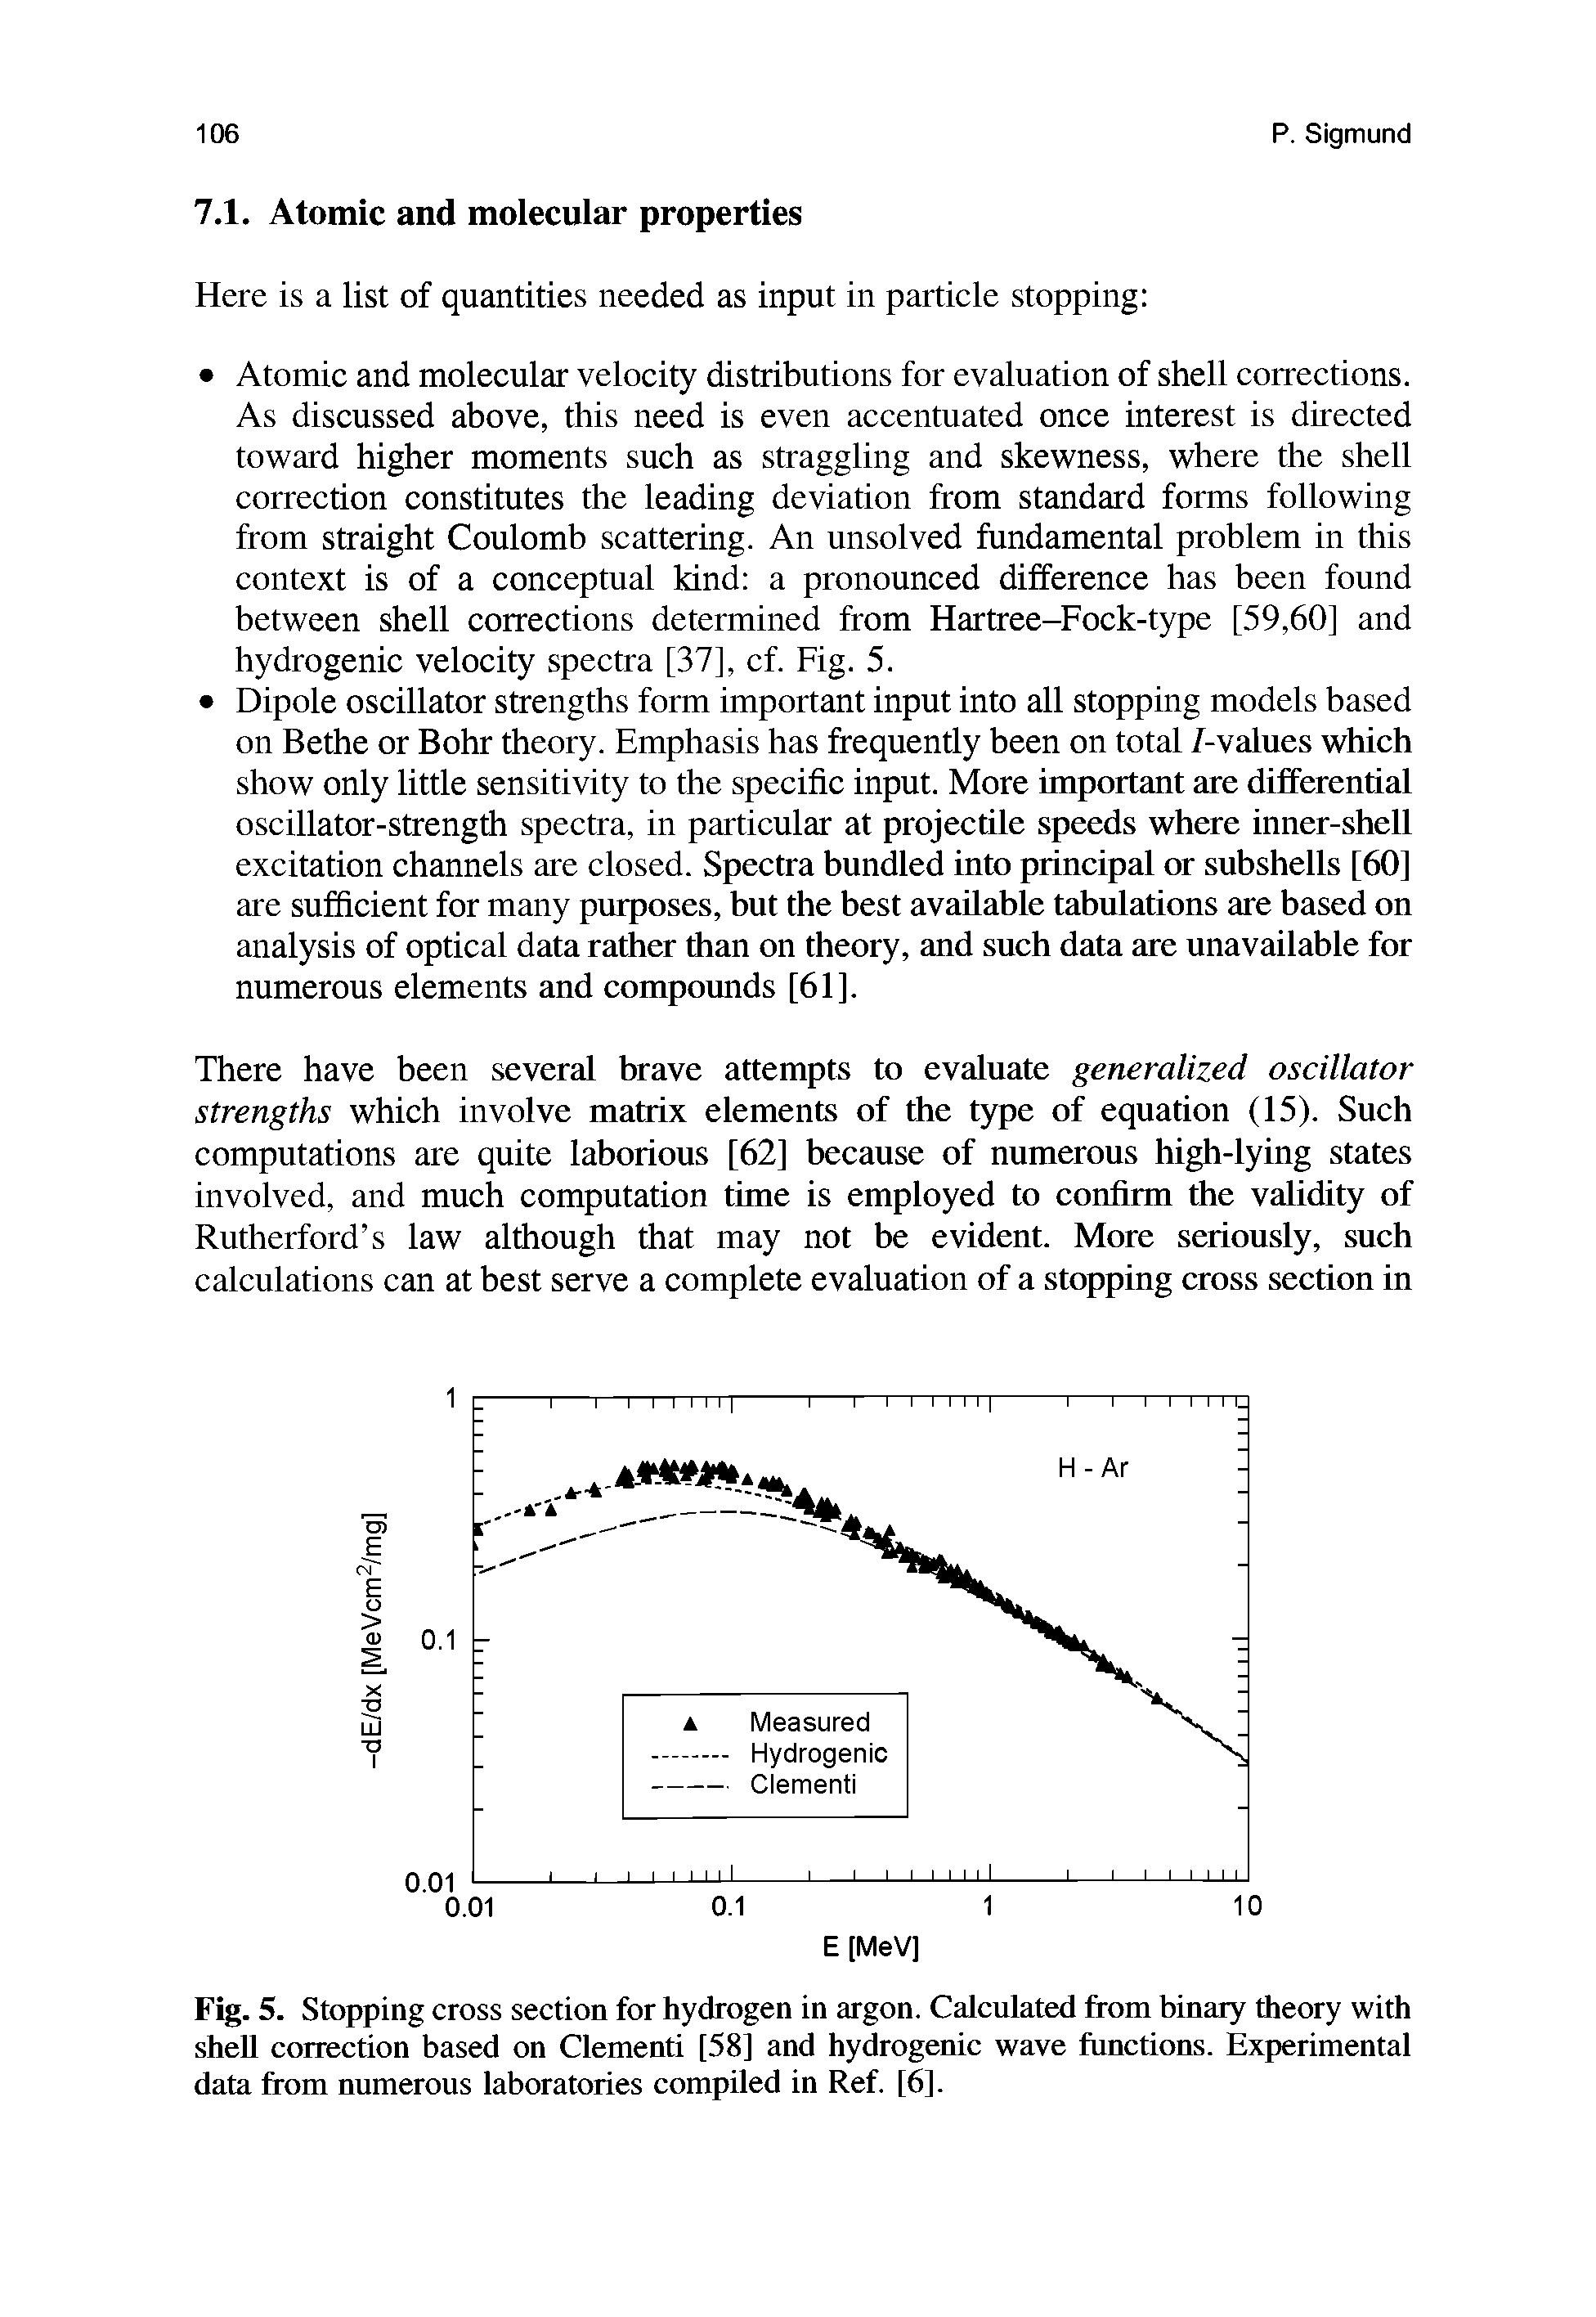 Fig. 5. Stopping cross section for hydrogen in argon. Calculated from binary theory with shell correction based on Clementi [58] and hydrogenic wave functions. Experimental data from numerous laboratories compiled in Ref. [6].